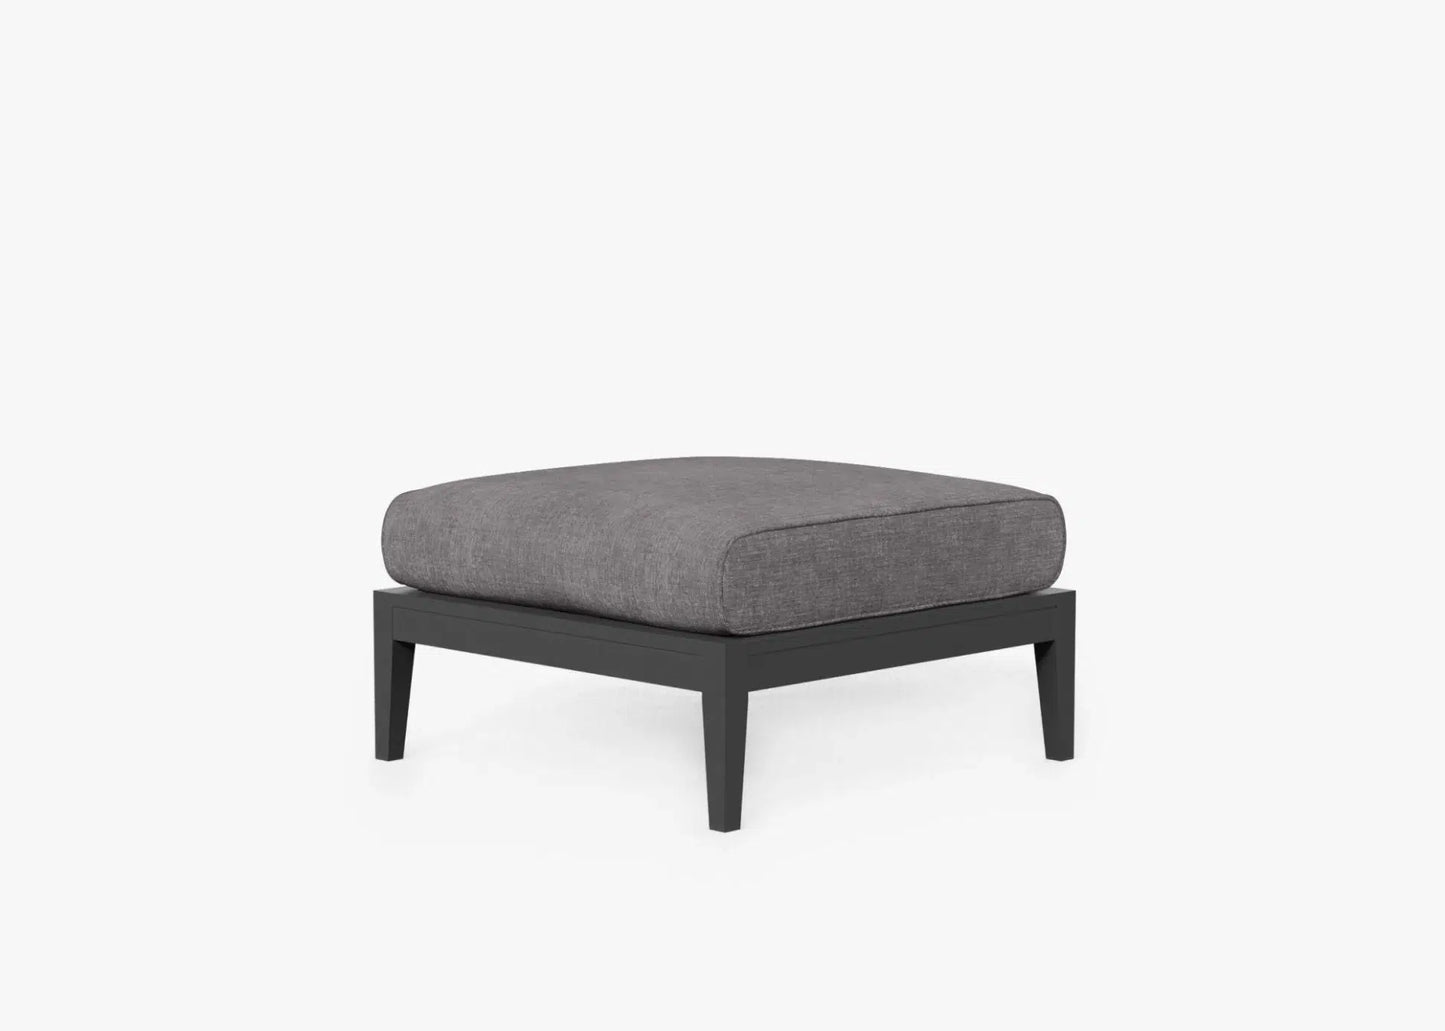 Live Outer 29" Charcoal Aluminum Outdoor Ottoman With Dark Pebble Gray Cushion